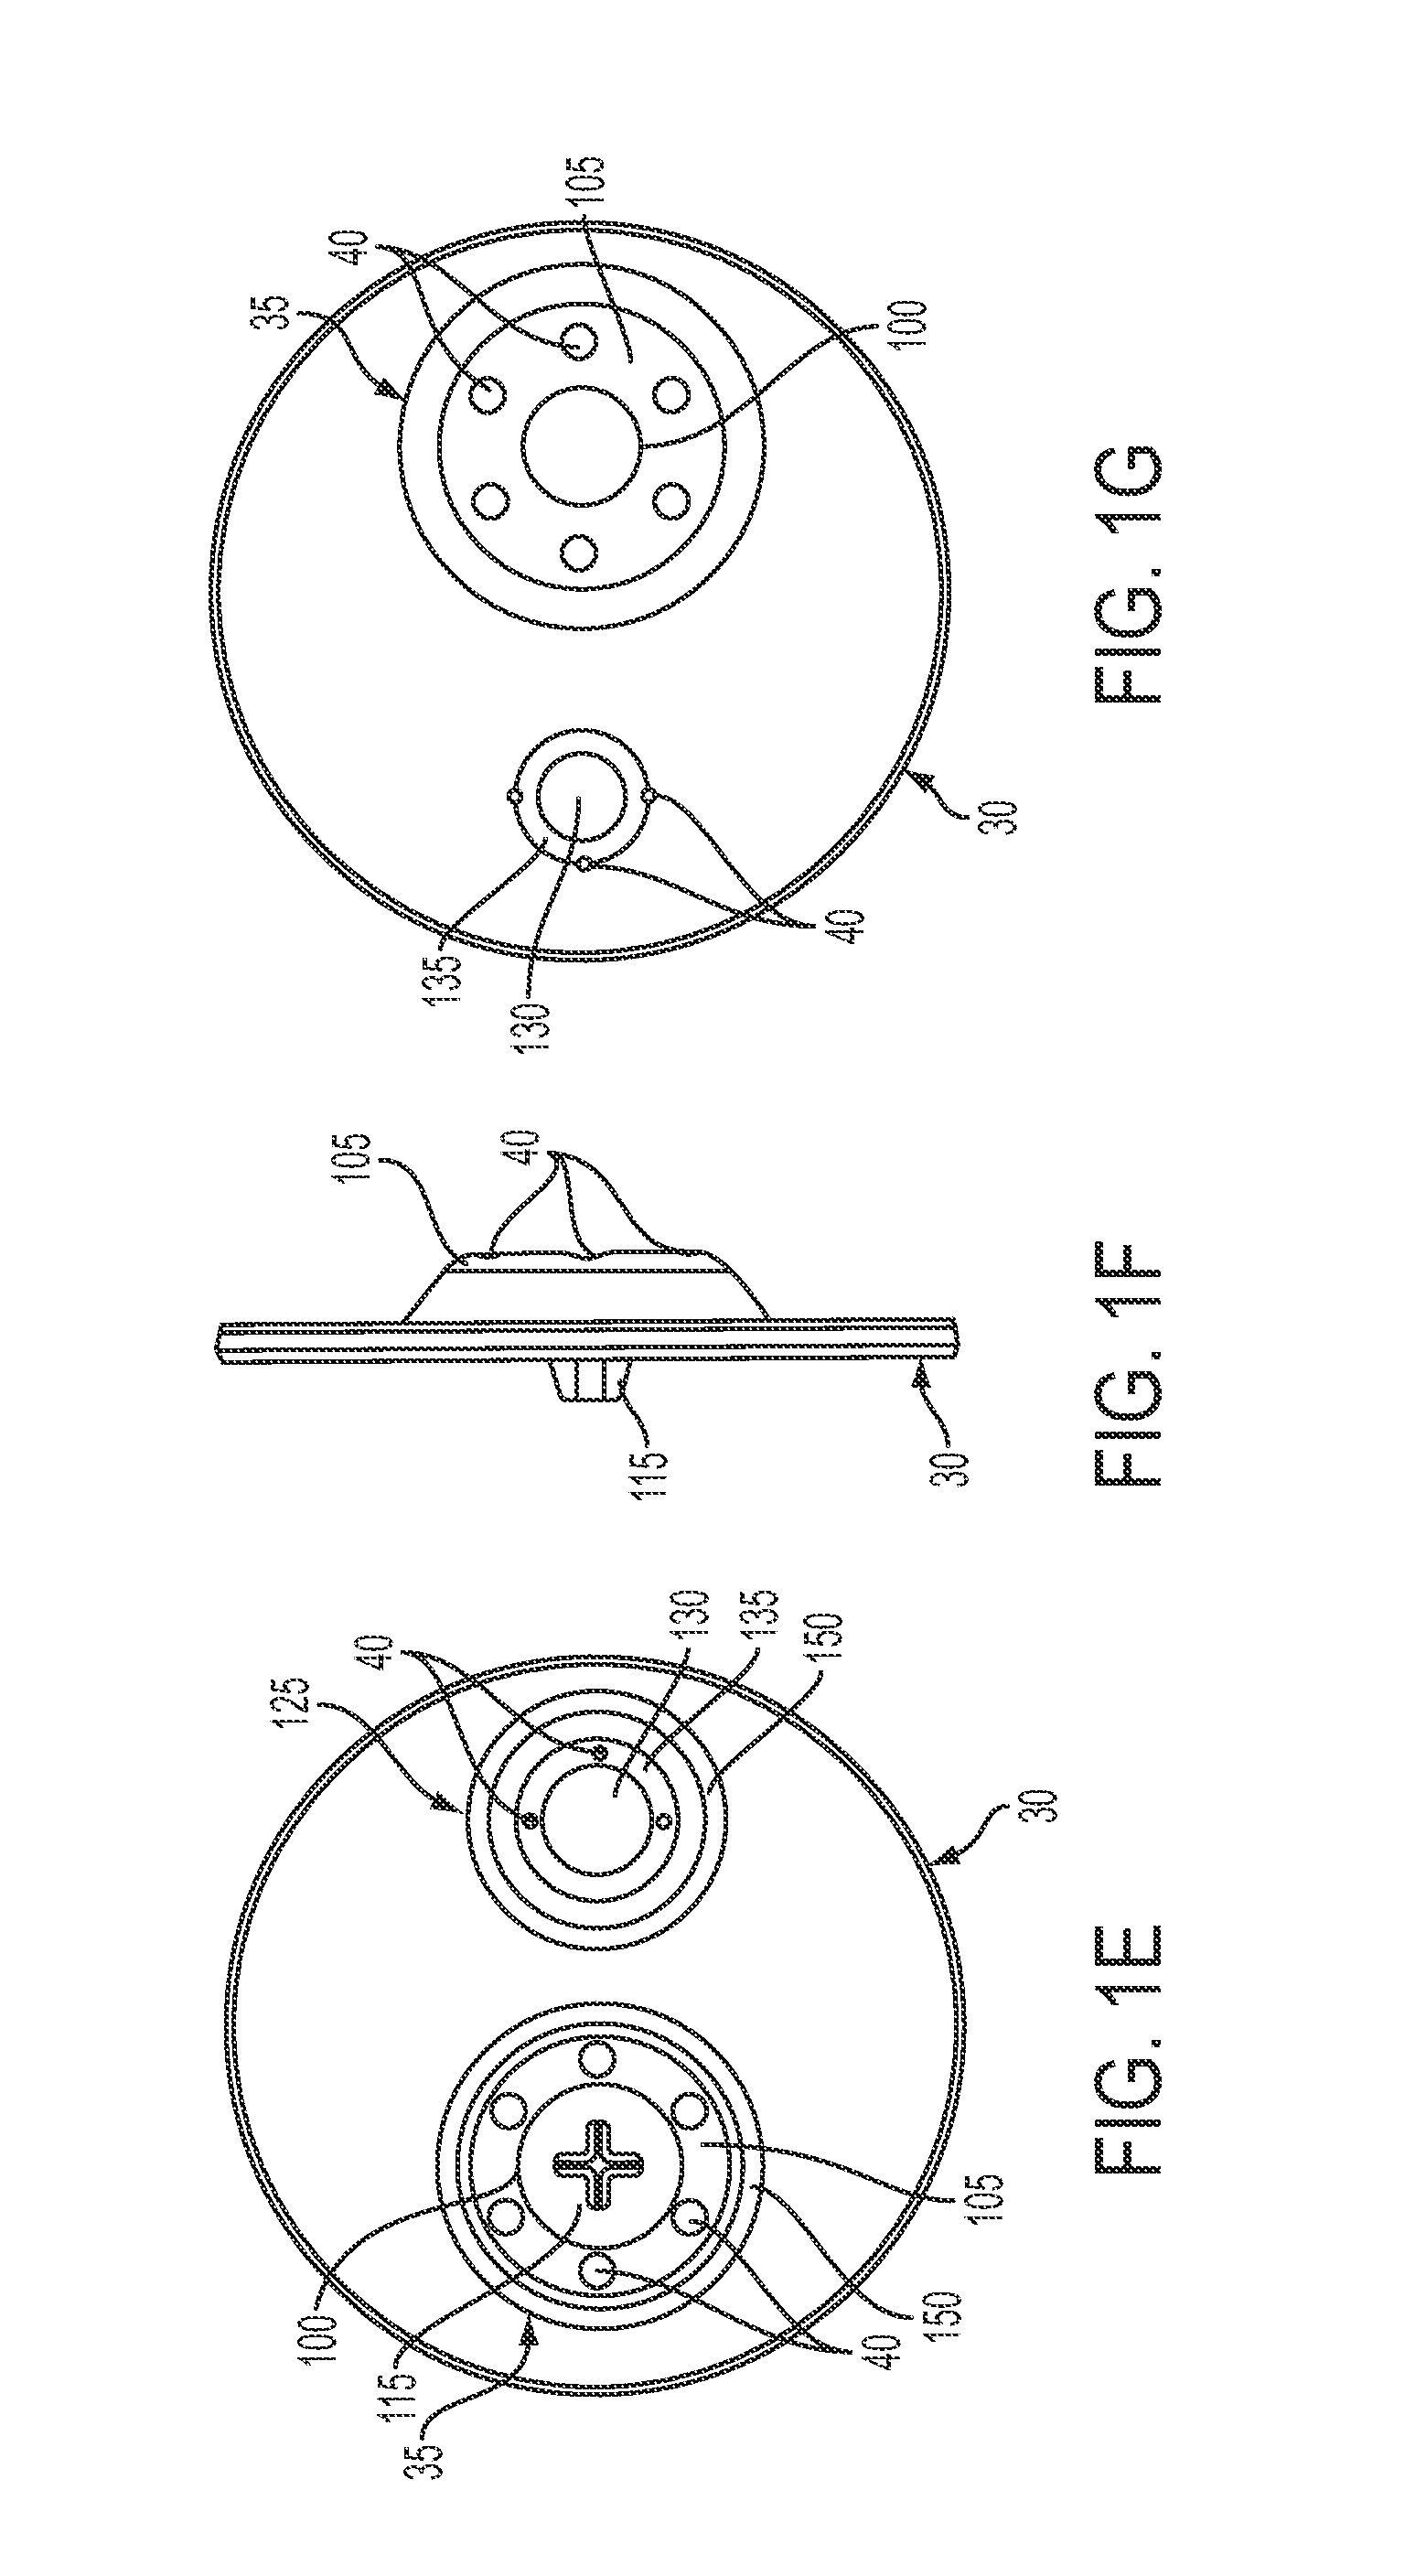 Container with Sealed Cap and Venting System